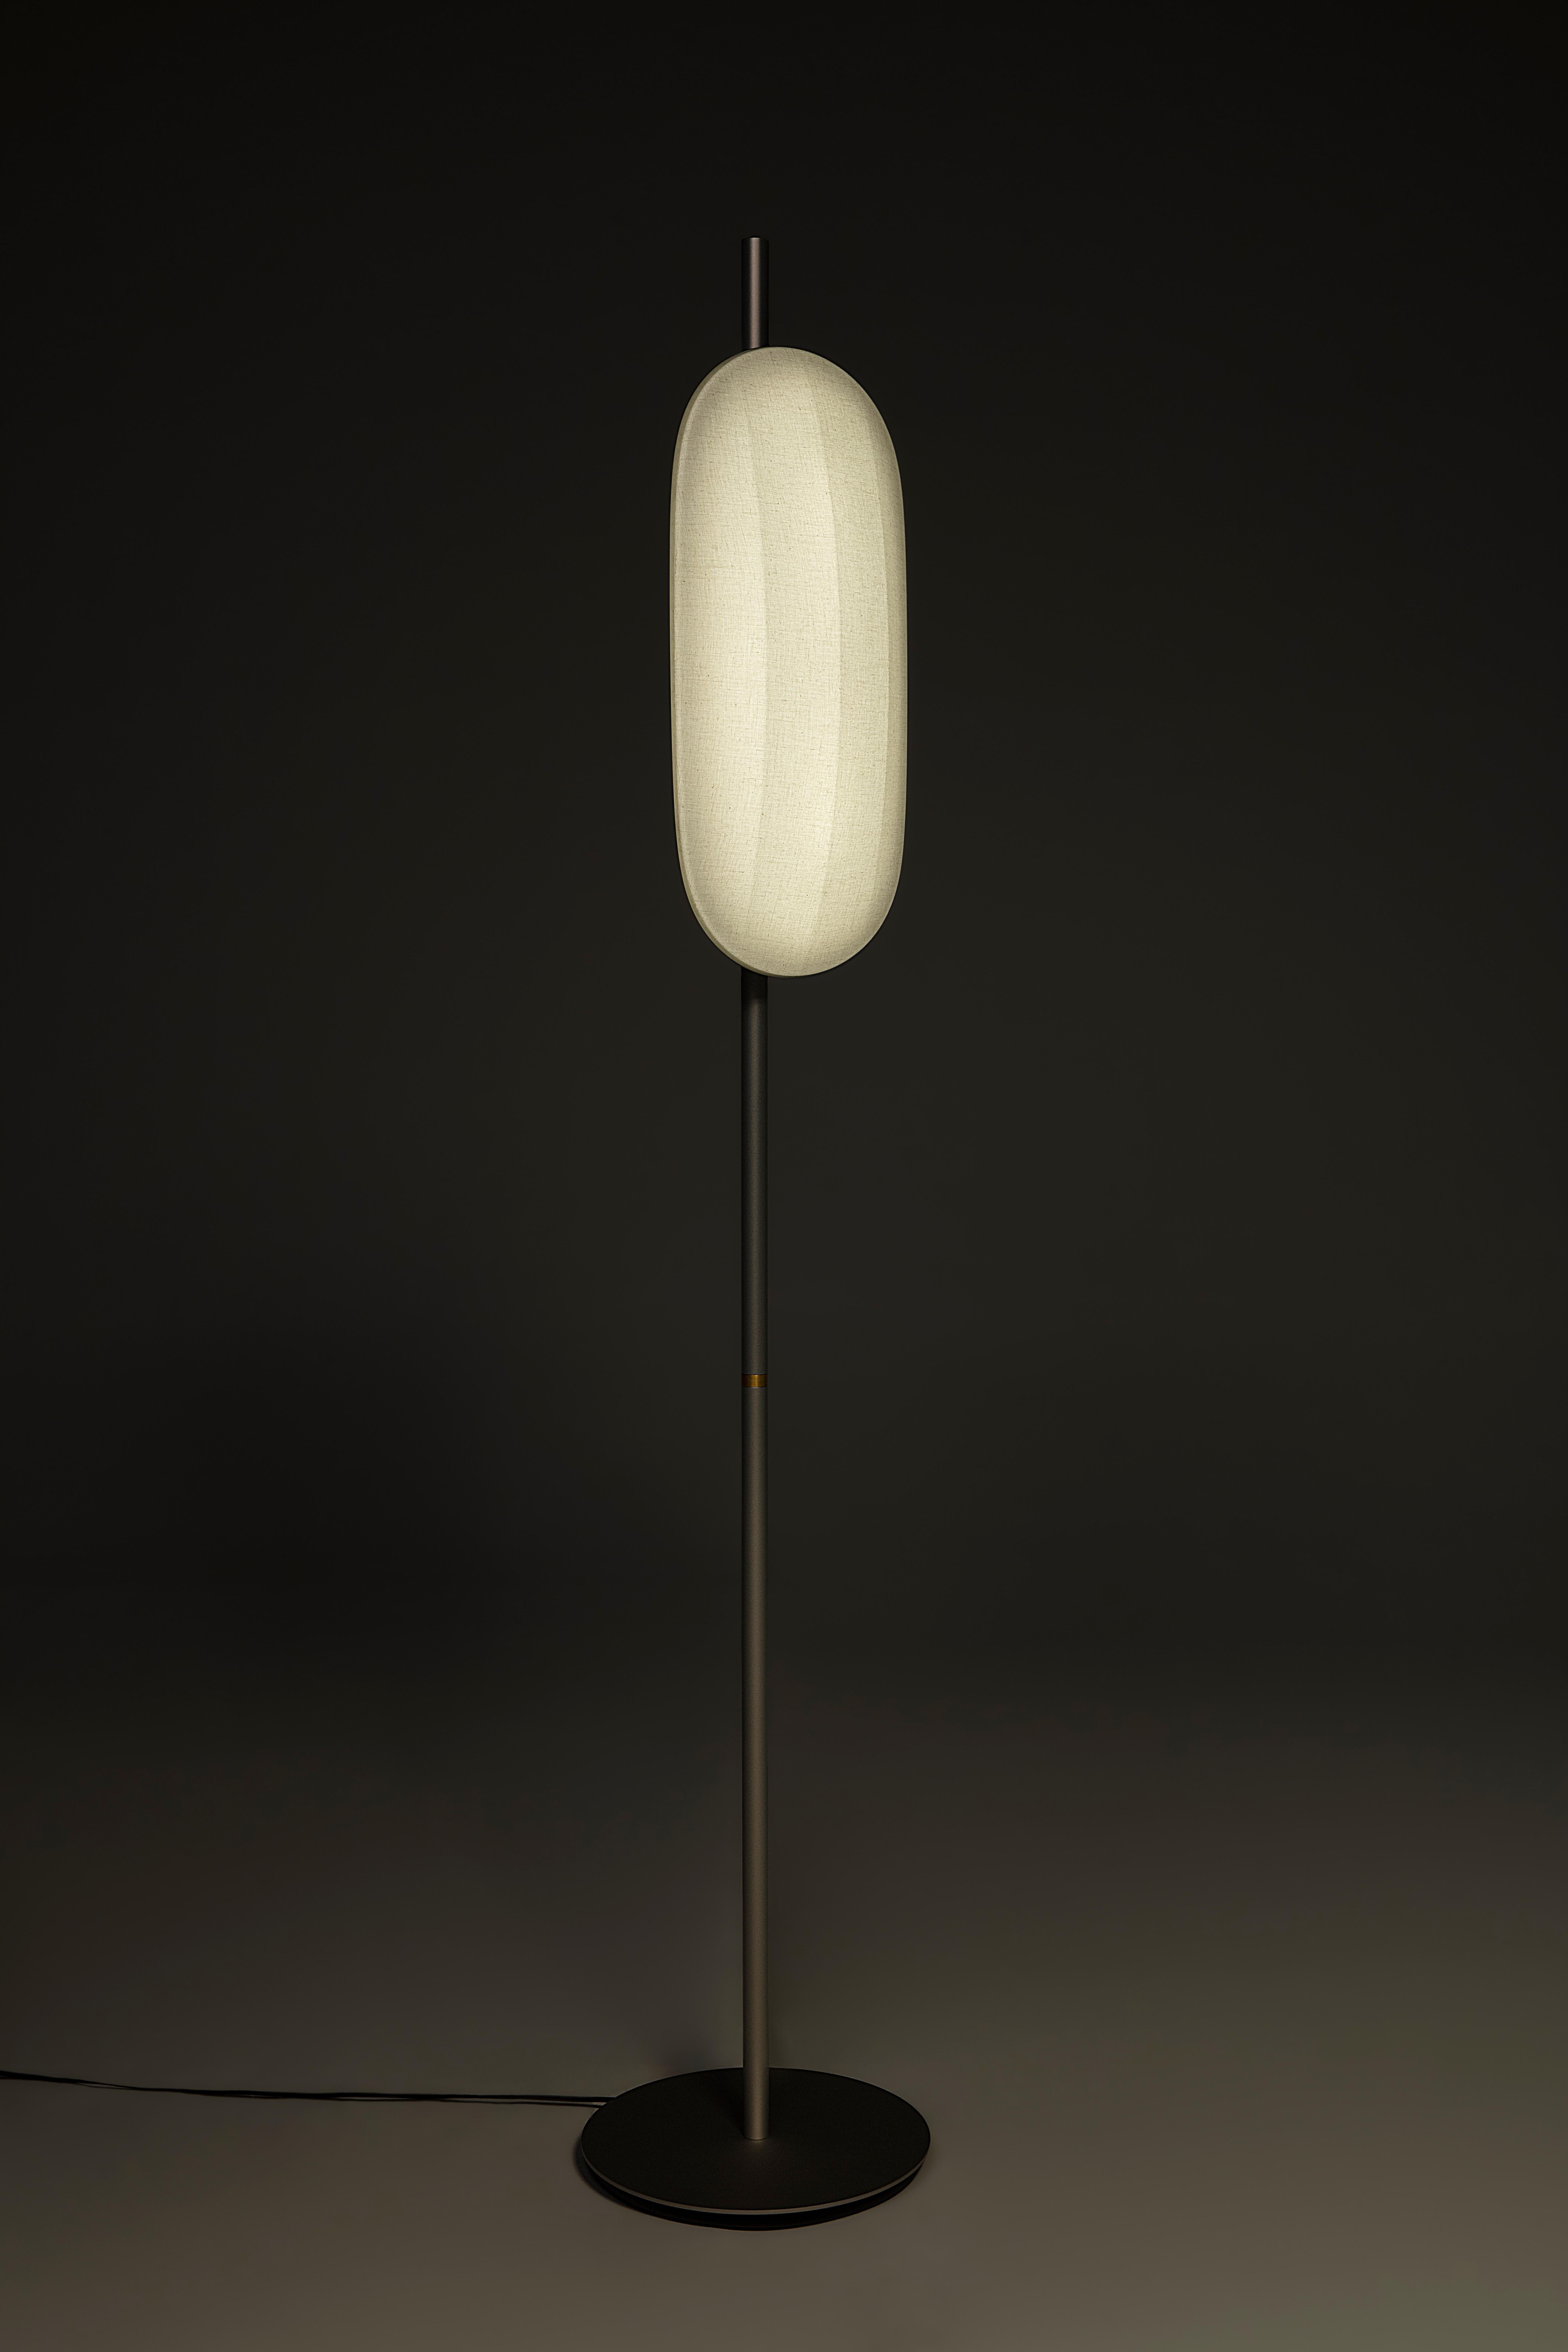 Voyage Floor Lamp by Bymars x AGO Lighting
Silver

Materials: Aluminum, Cotton fabric, PMMA 
Light Source: Integrated LED (SMD), DC
Watt. 10 W 
Color temp. 2700 / 3000K
Cable Length: 2.8 m 

Dimensions:
H. 172 cm x D. 32 cm 

VOYAGE the